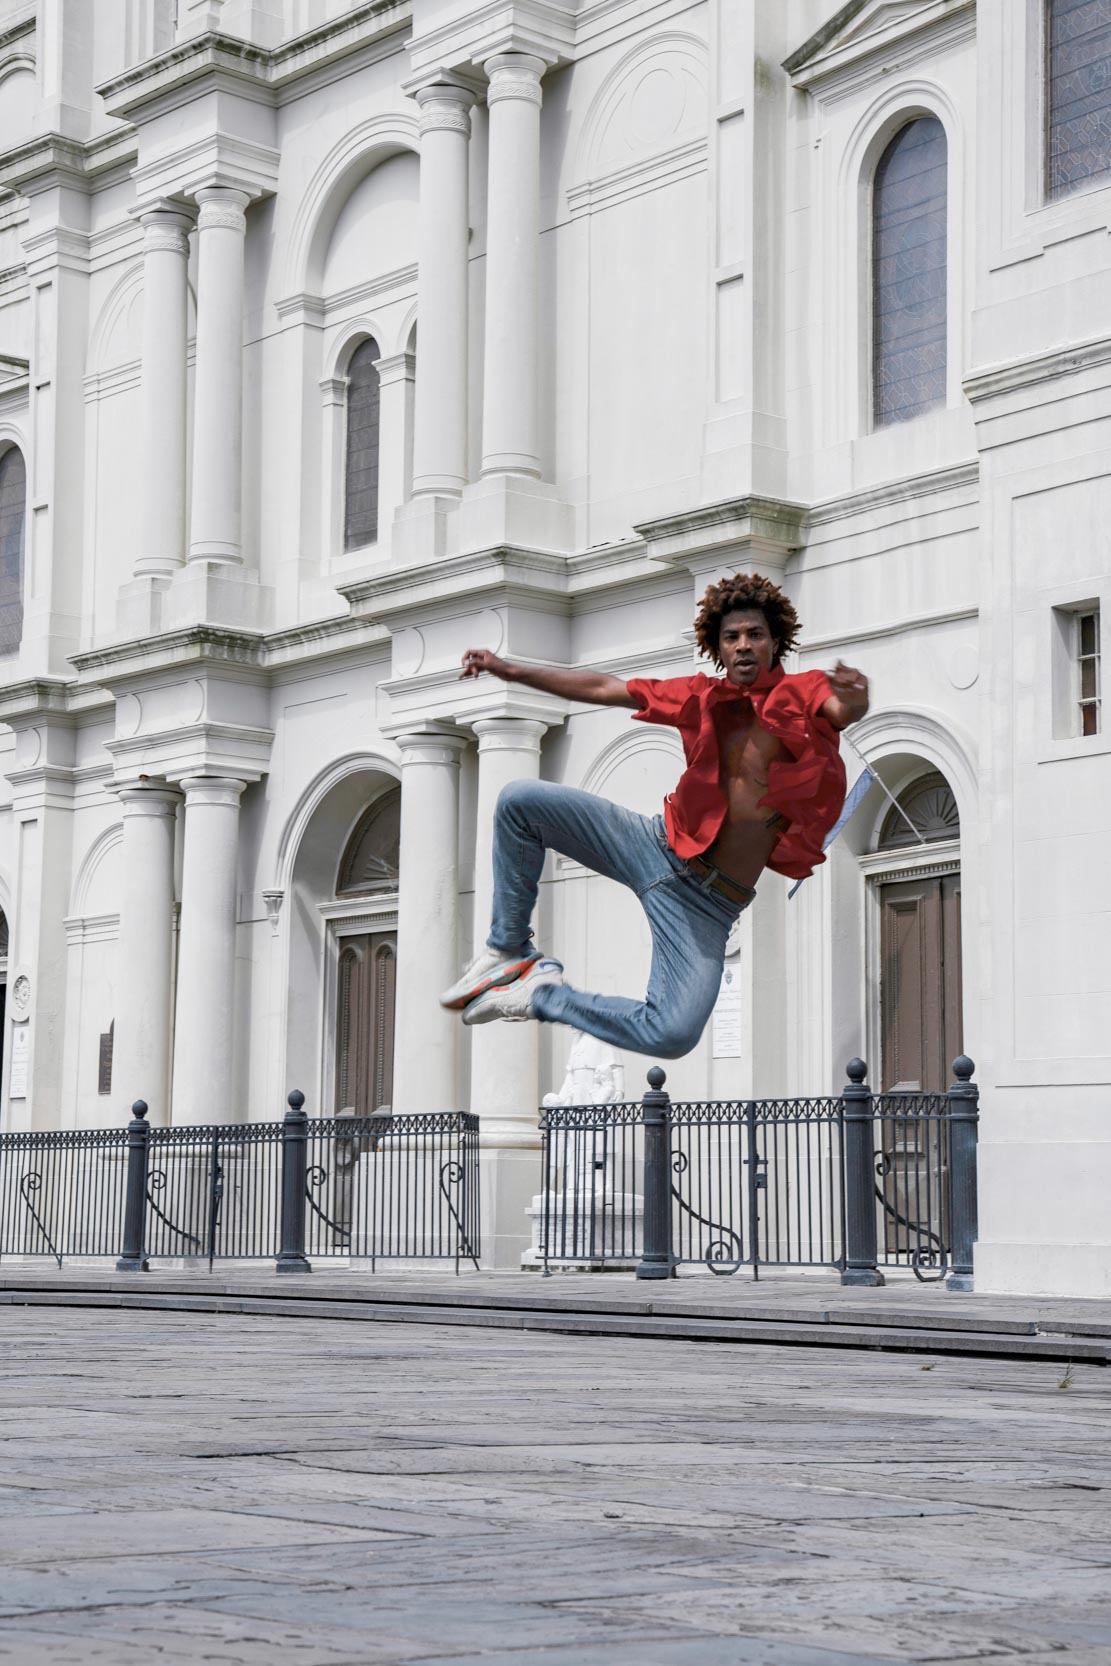 Dancer performing in front of French Quarter cathedral in New Orleans